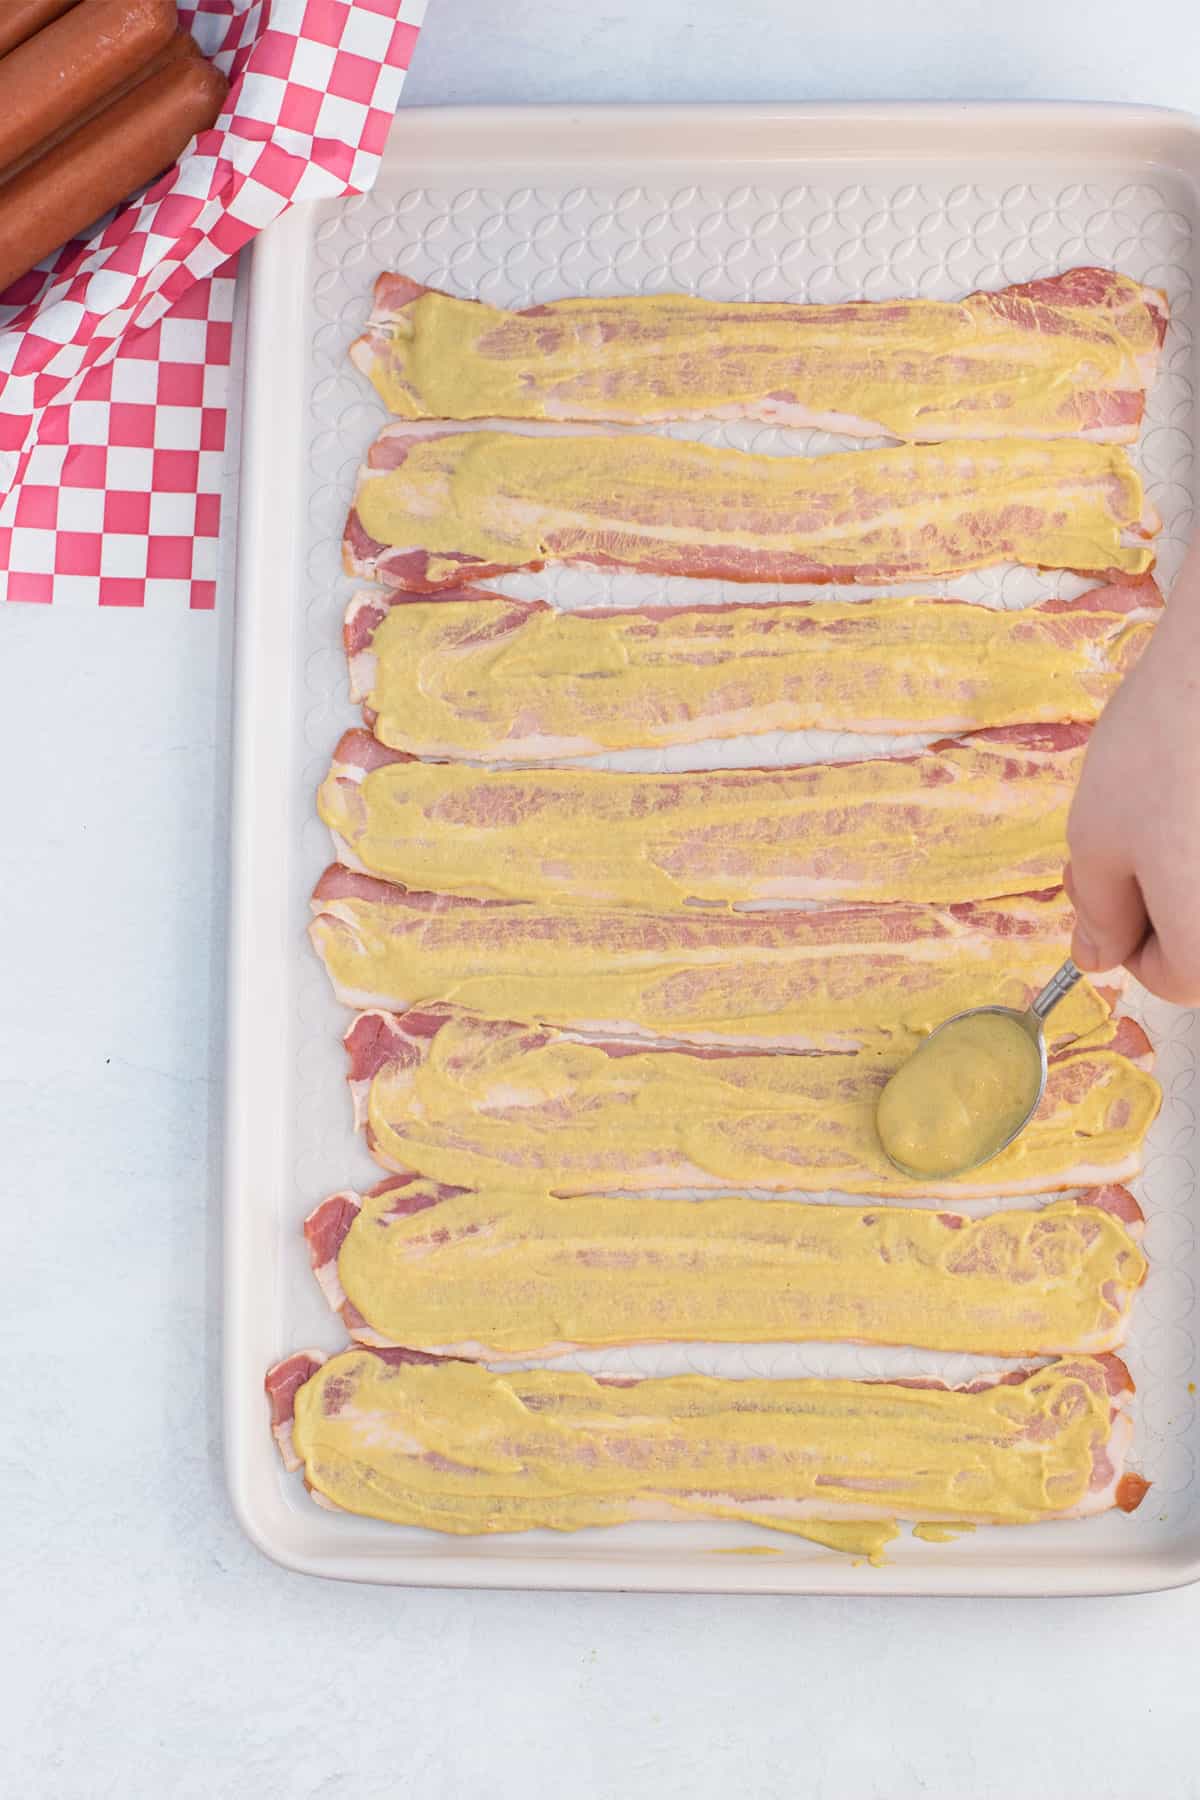 A white tray lined with bacon smothered in mustard with a hand holding a spoon of mustard spreading it on. In the corner is a red and white checked towel with raw hot dogs on it.